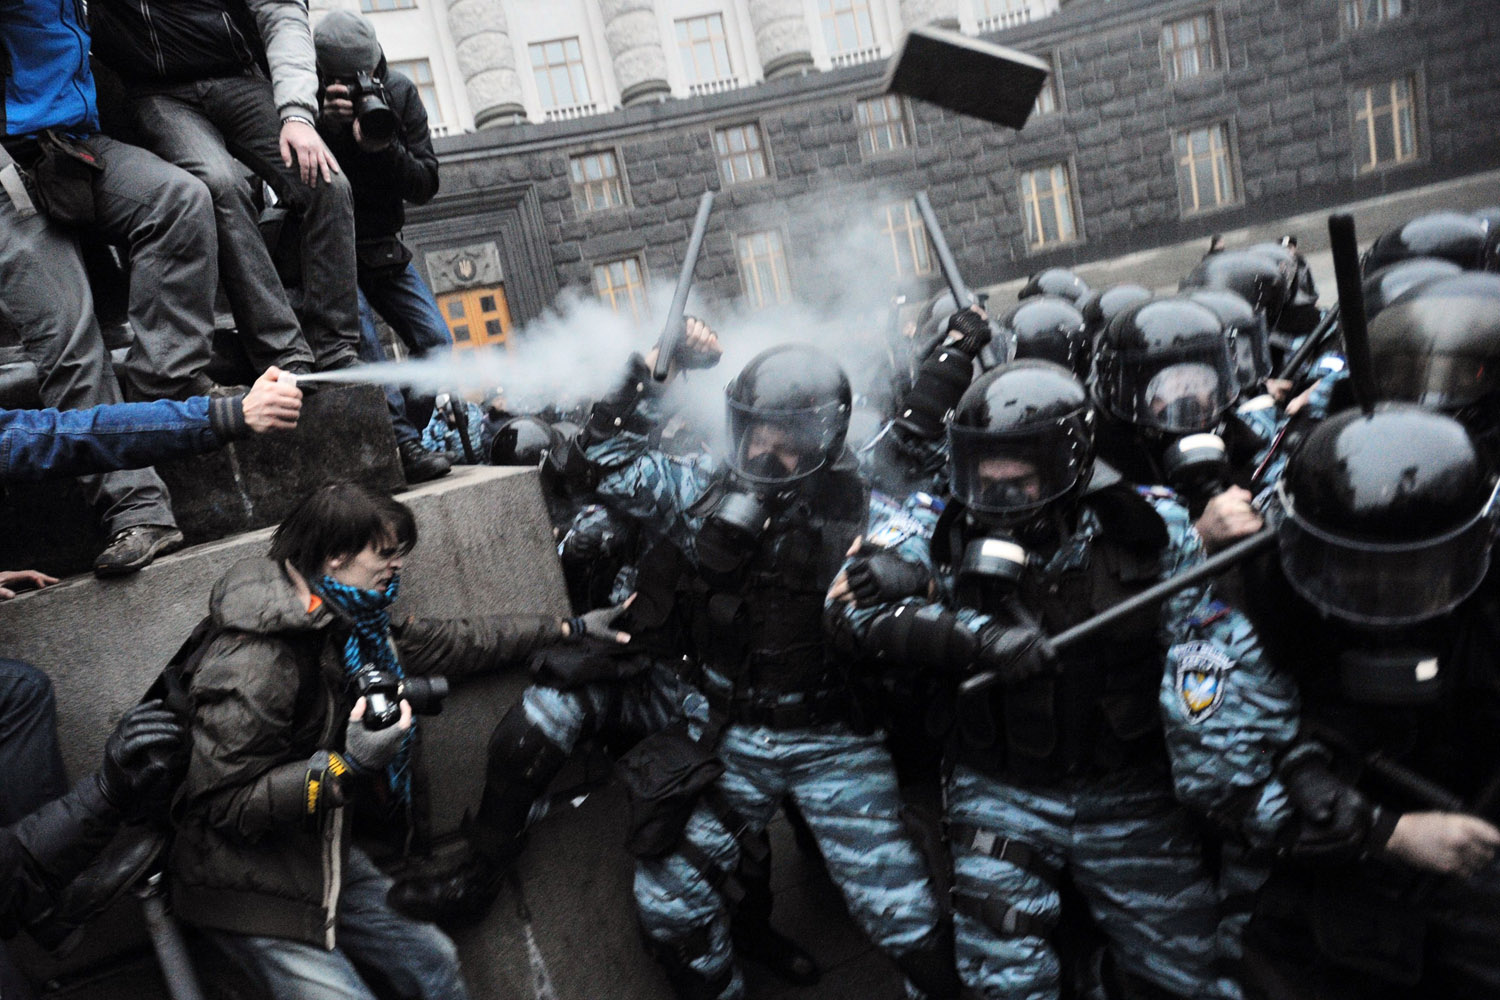 Nov. 24, 2013. Protesters use tear gas and throw stones during clashes with riot police in front of the Cabinet of Ministers of Ukraine during a rally in Kiev.